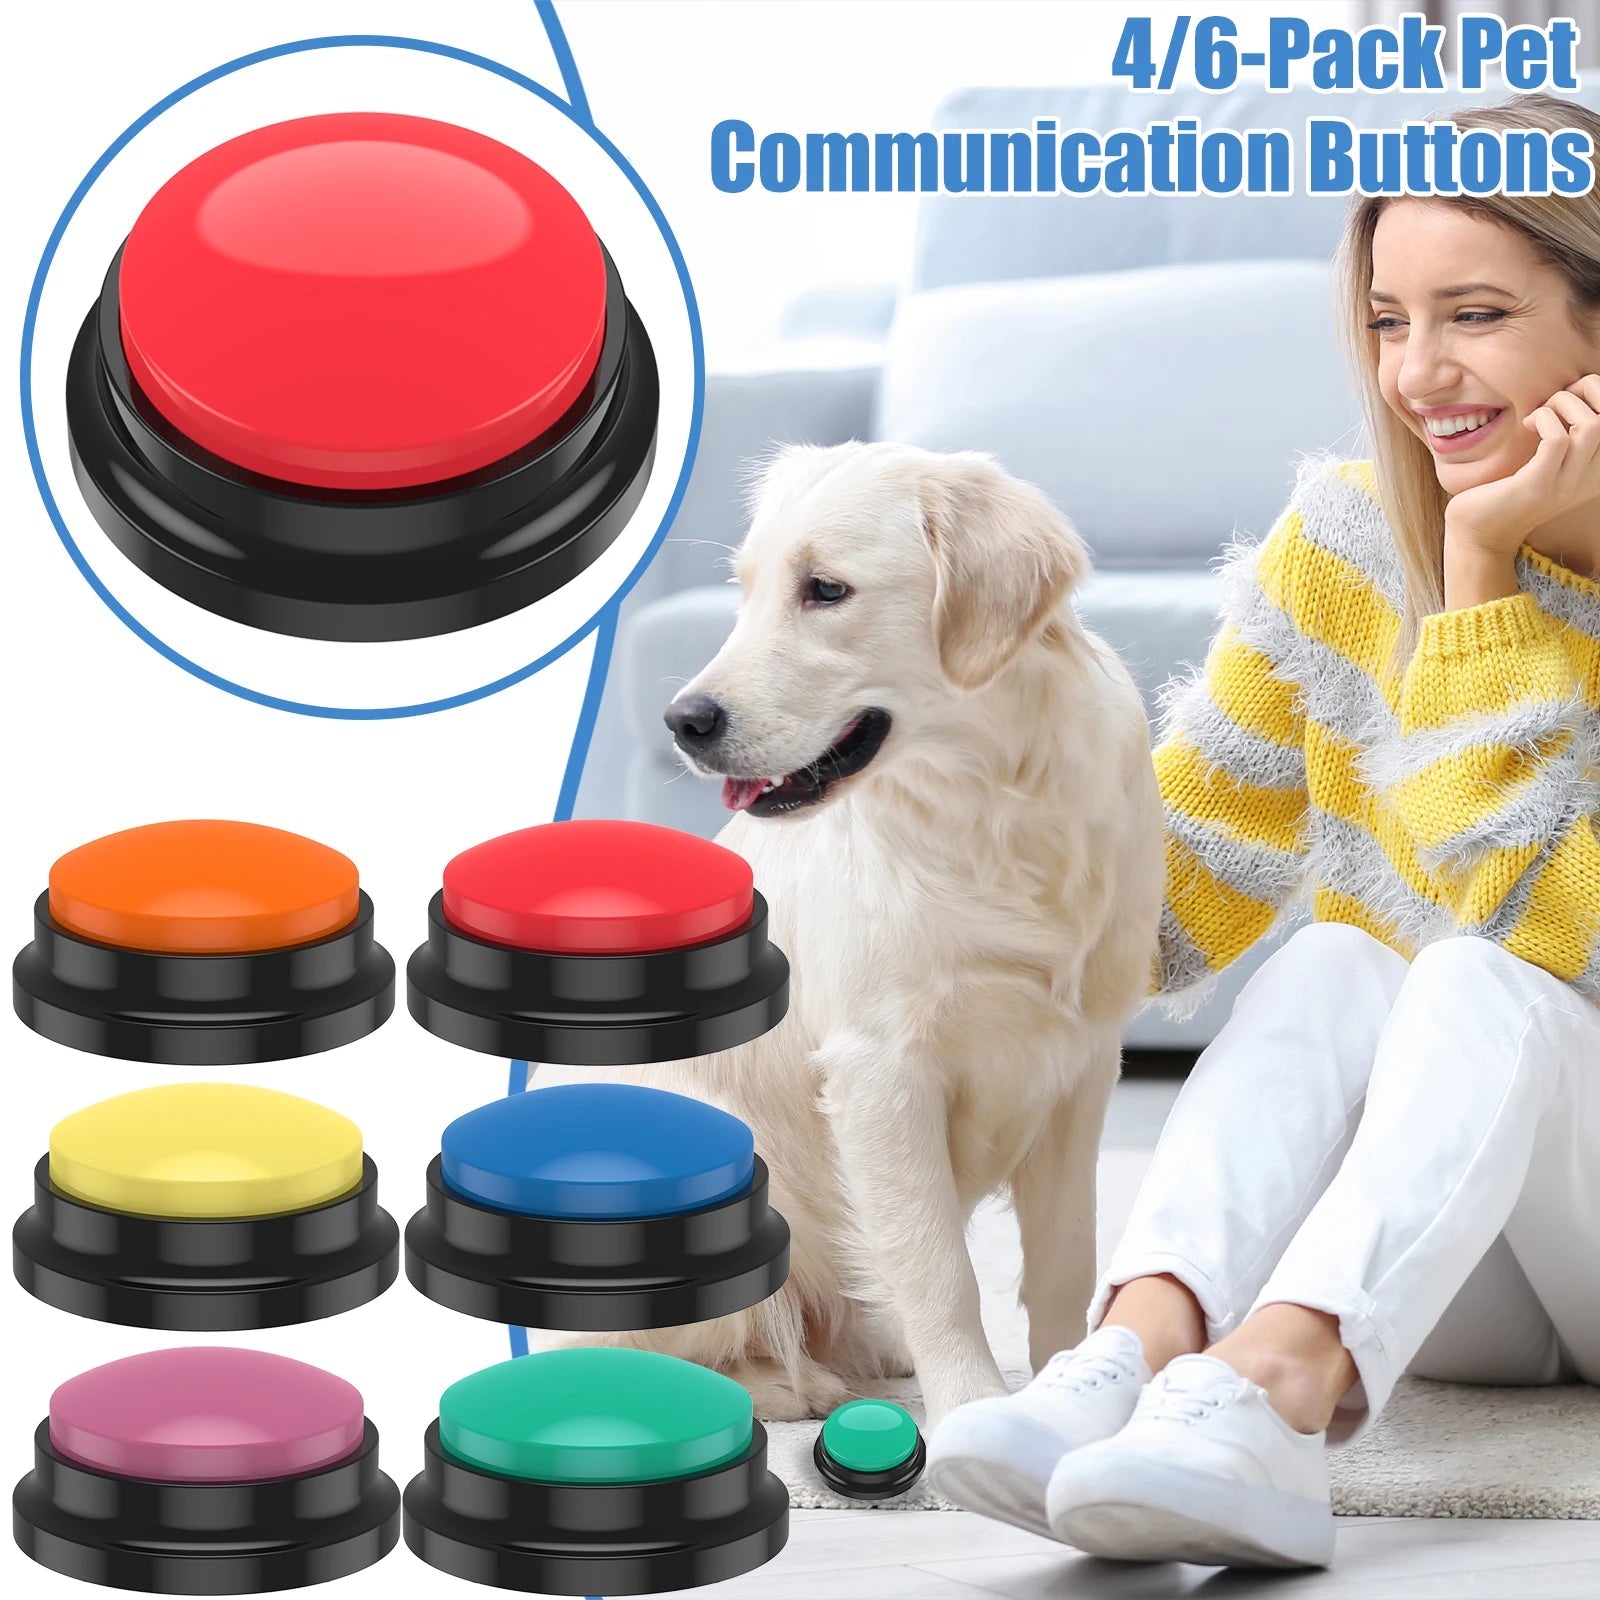 Recordable Dog Training Buttons Dog Toys Best Pet 